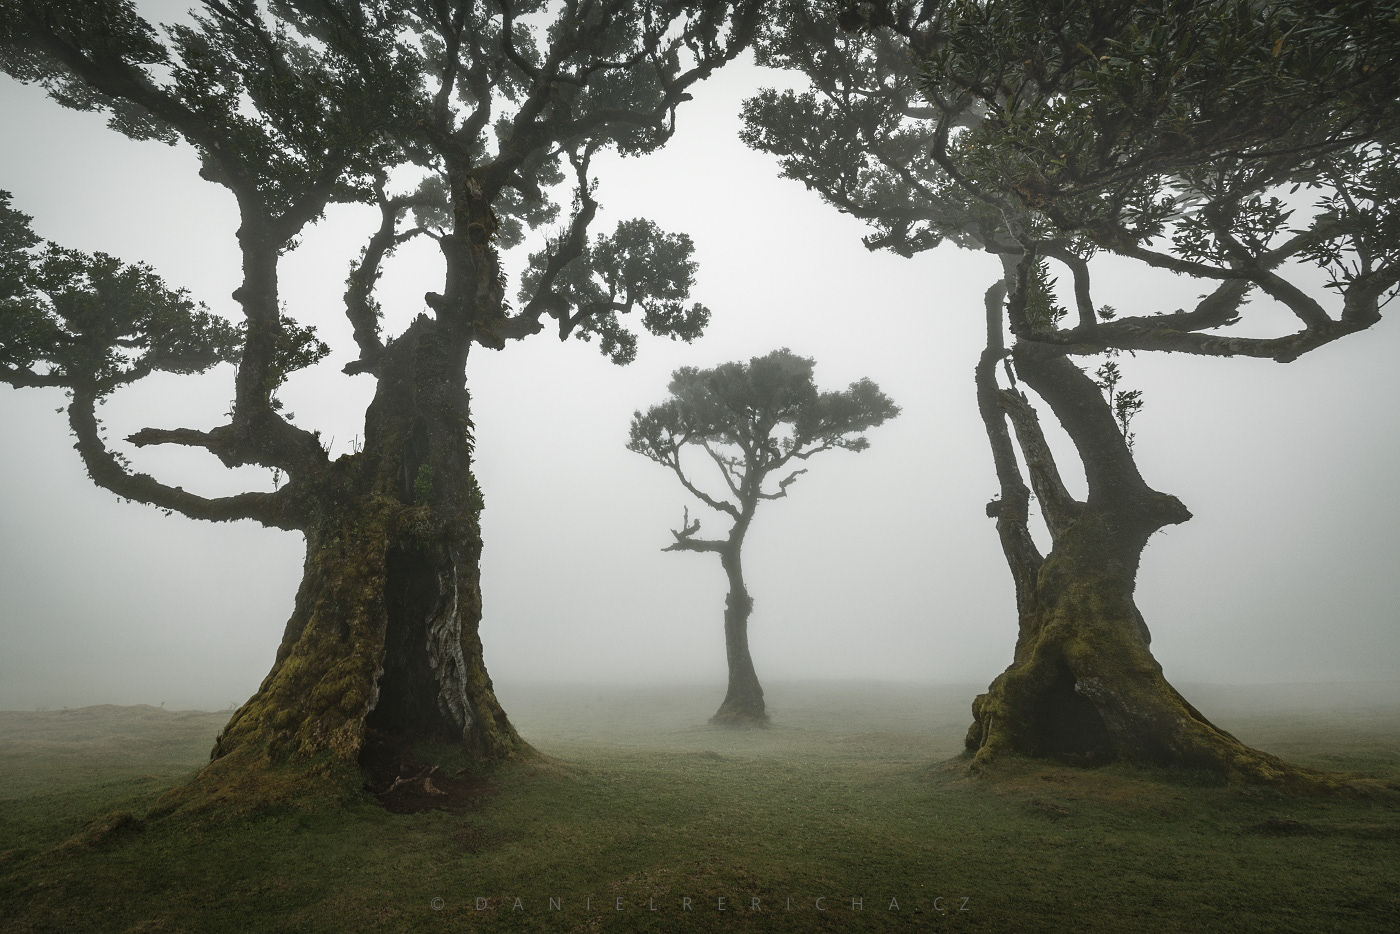 The magical misty forest of Fanal on the island of Madeira - three